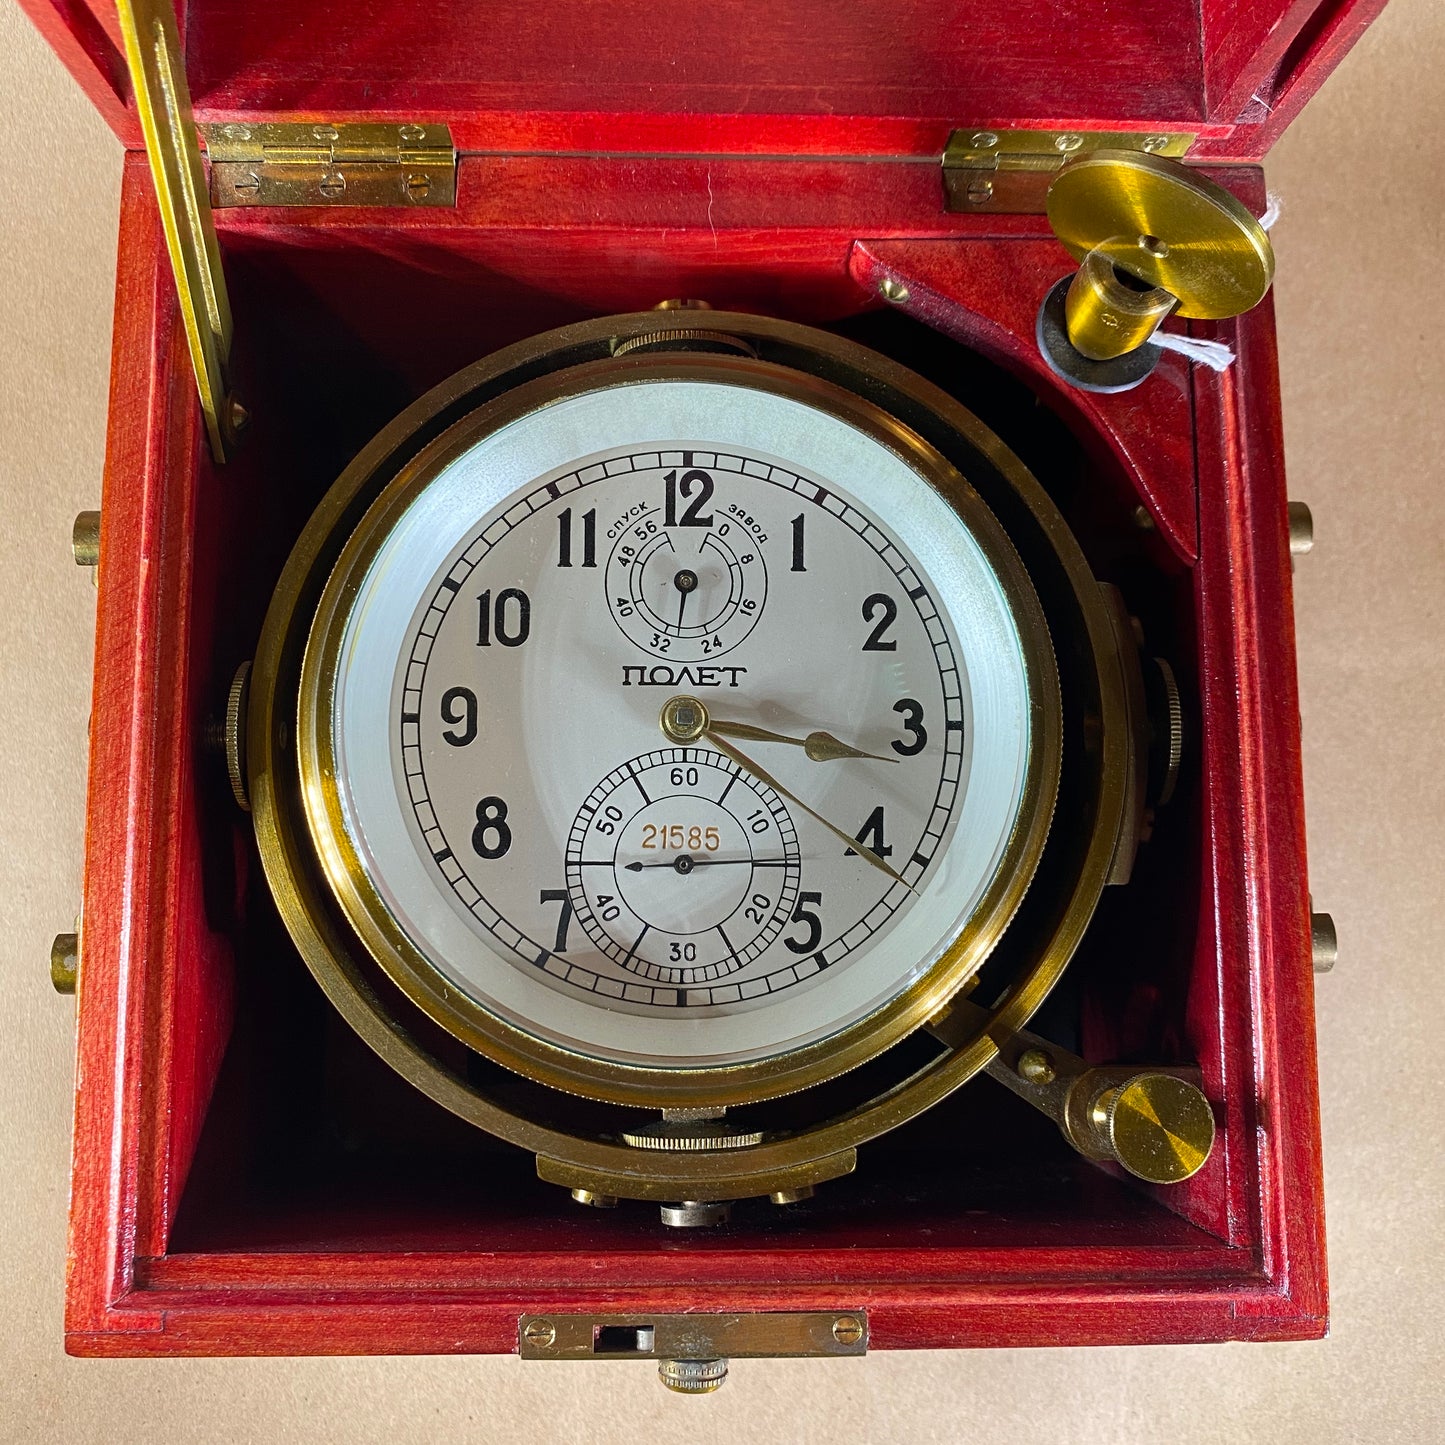 Chronometer, Russian Marine Gimballed, Brass with Rosewood Case - Annapolis Maritime Antiques